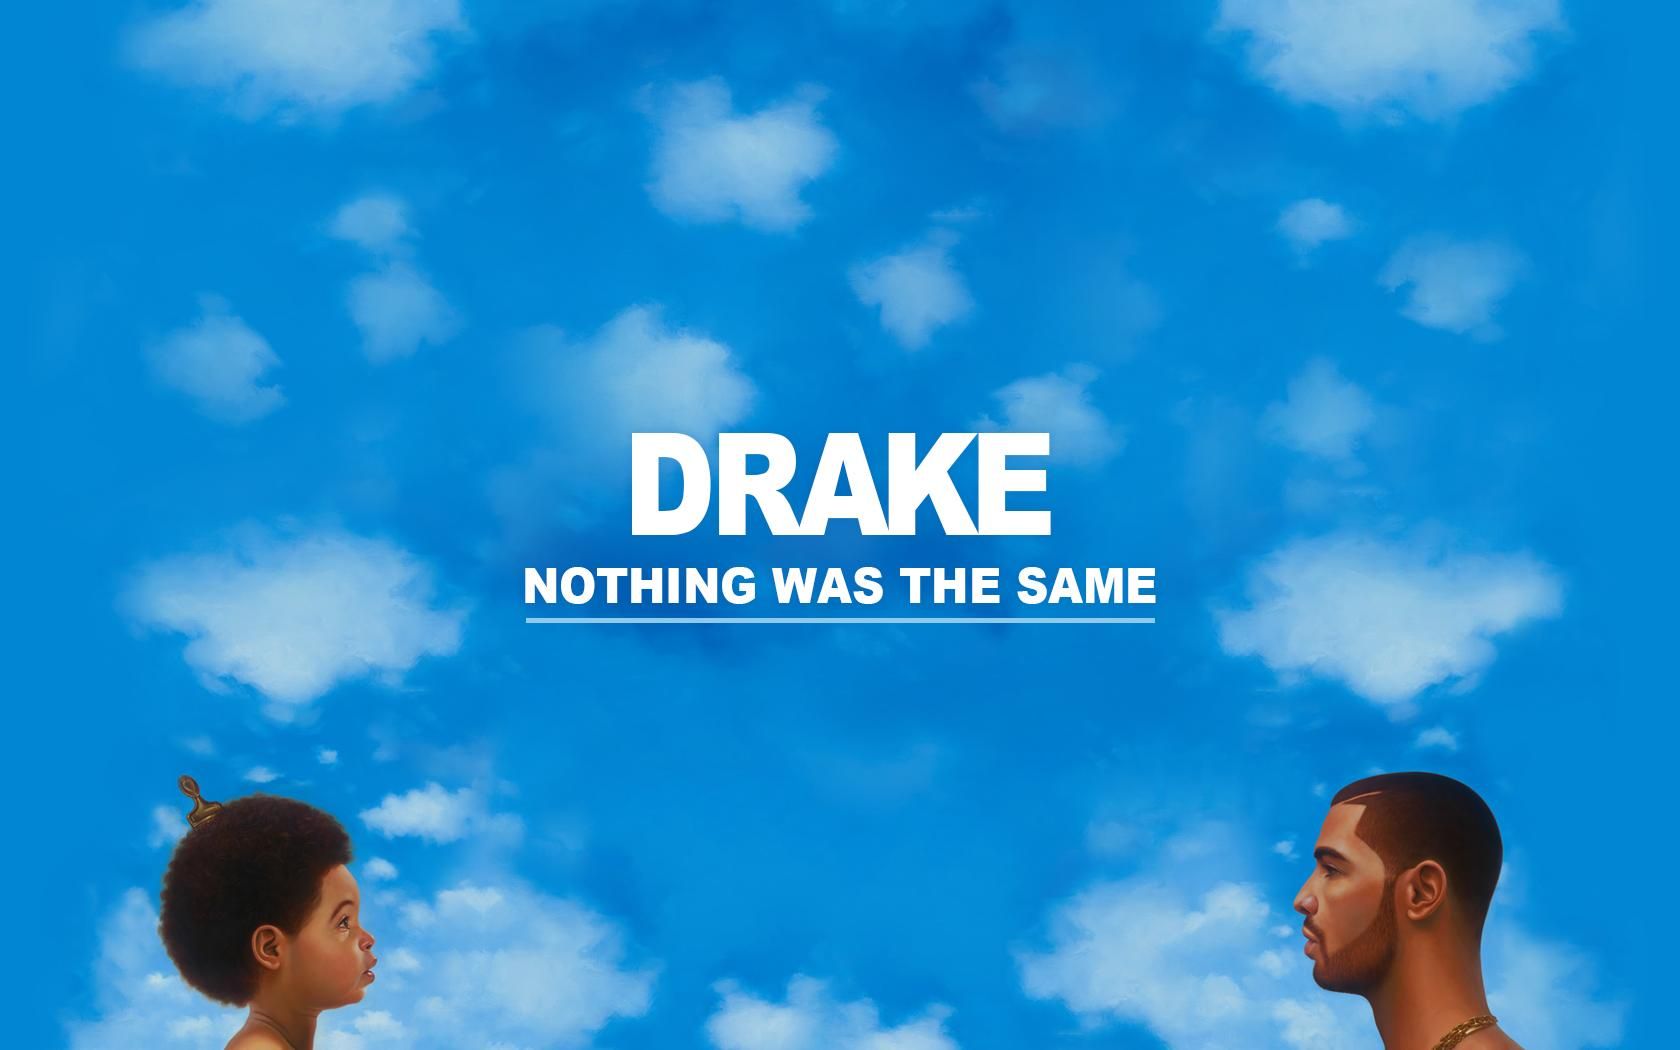 Nothing Was the Same Wallpaper. Cover wallpaper, Wallpaper for iphone Album covers